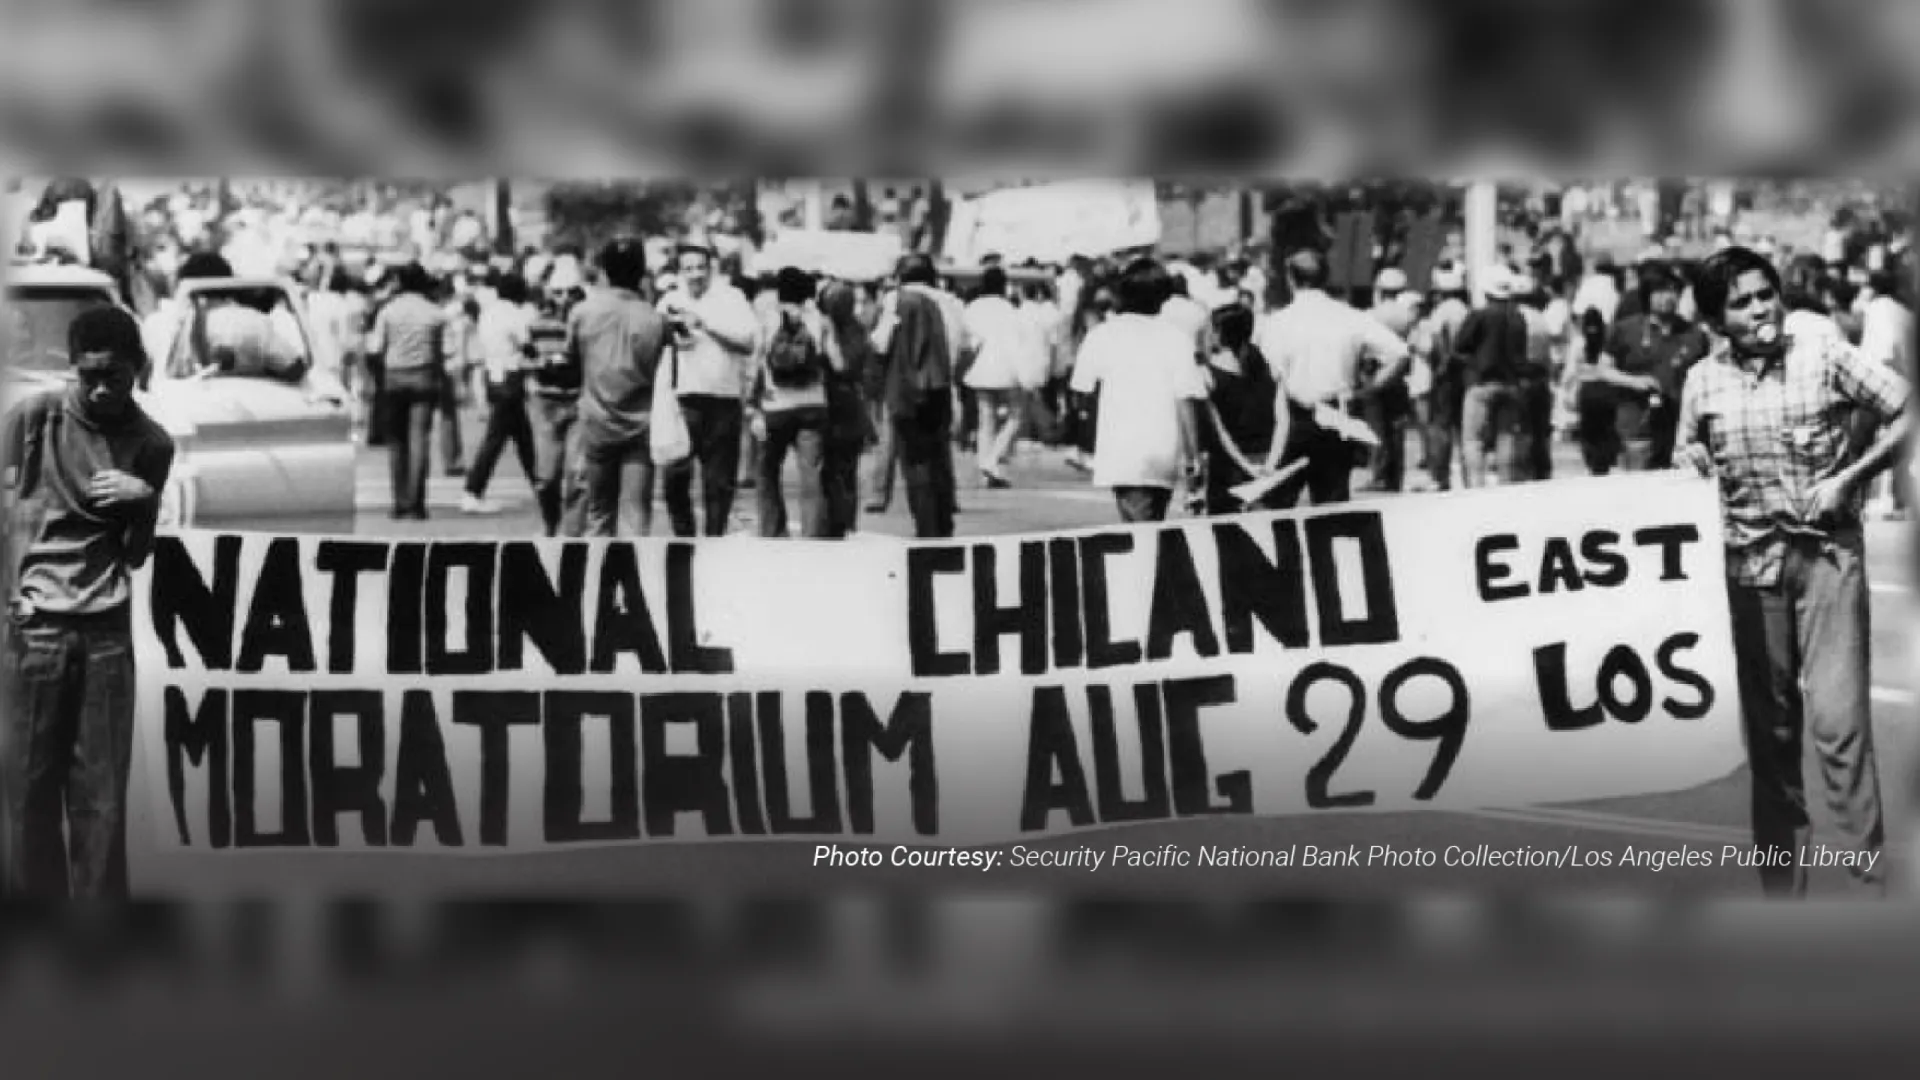 A scene from the National Chicano Moratorium protest in East Los Angeles, Aug. 29, 1970. Photo courtesy of Security Pacific Bank Photo Collection/Los Angeles Public Library.